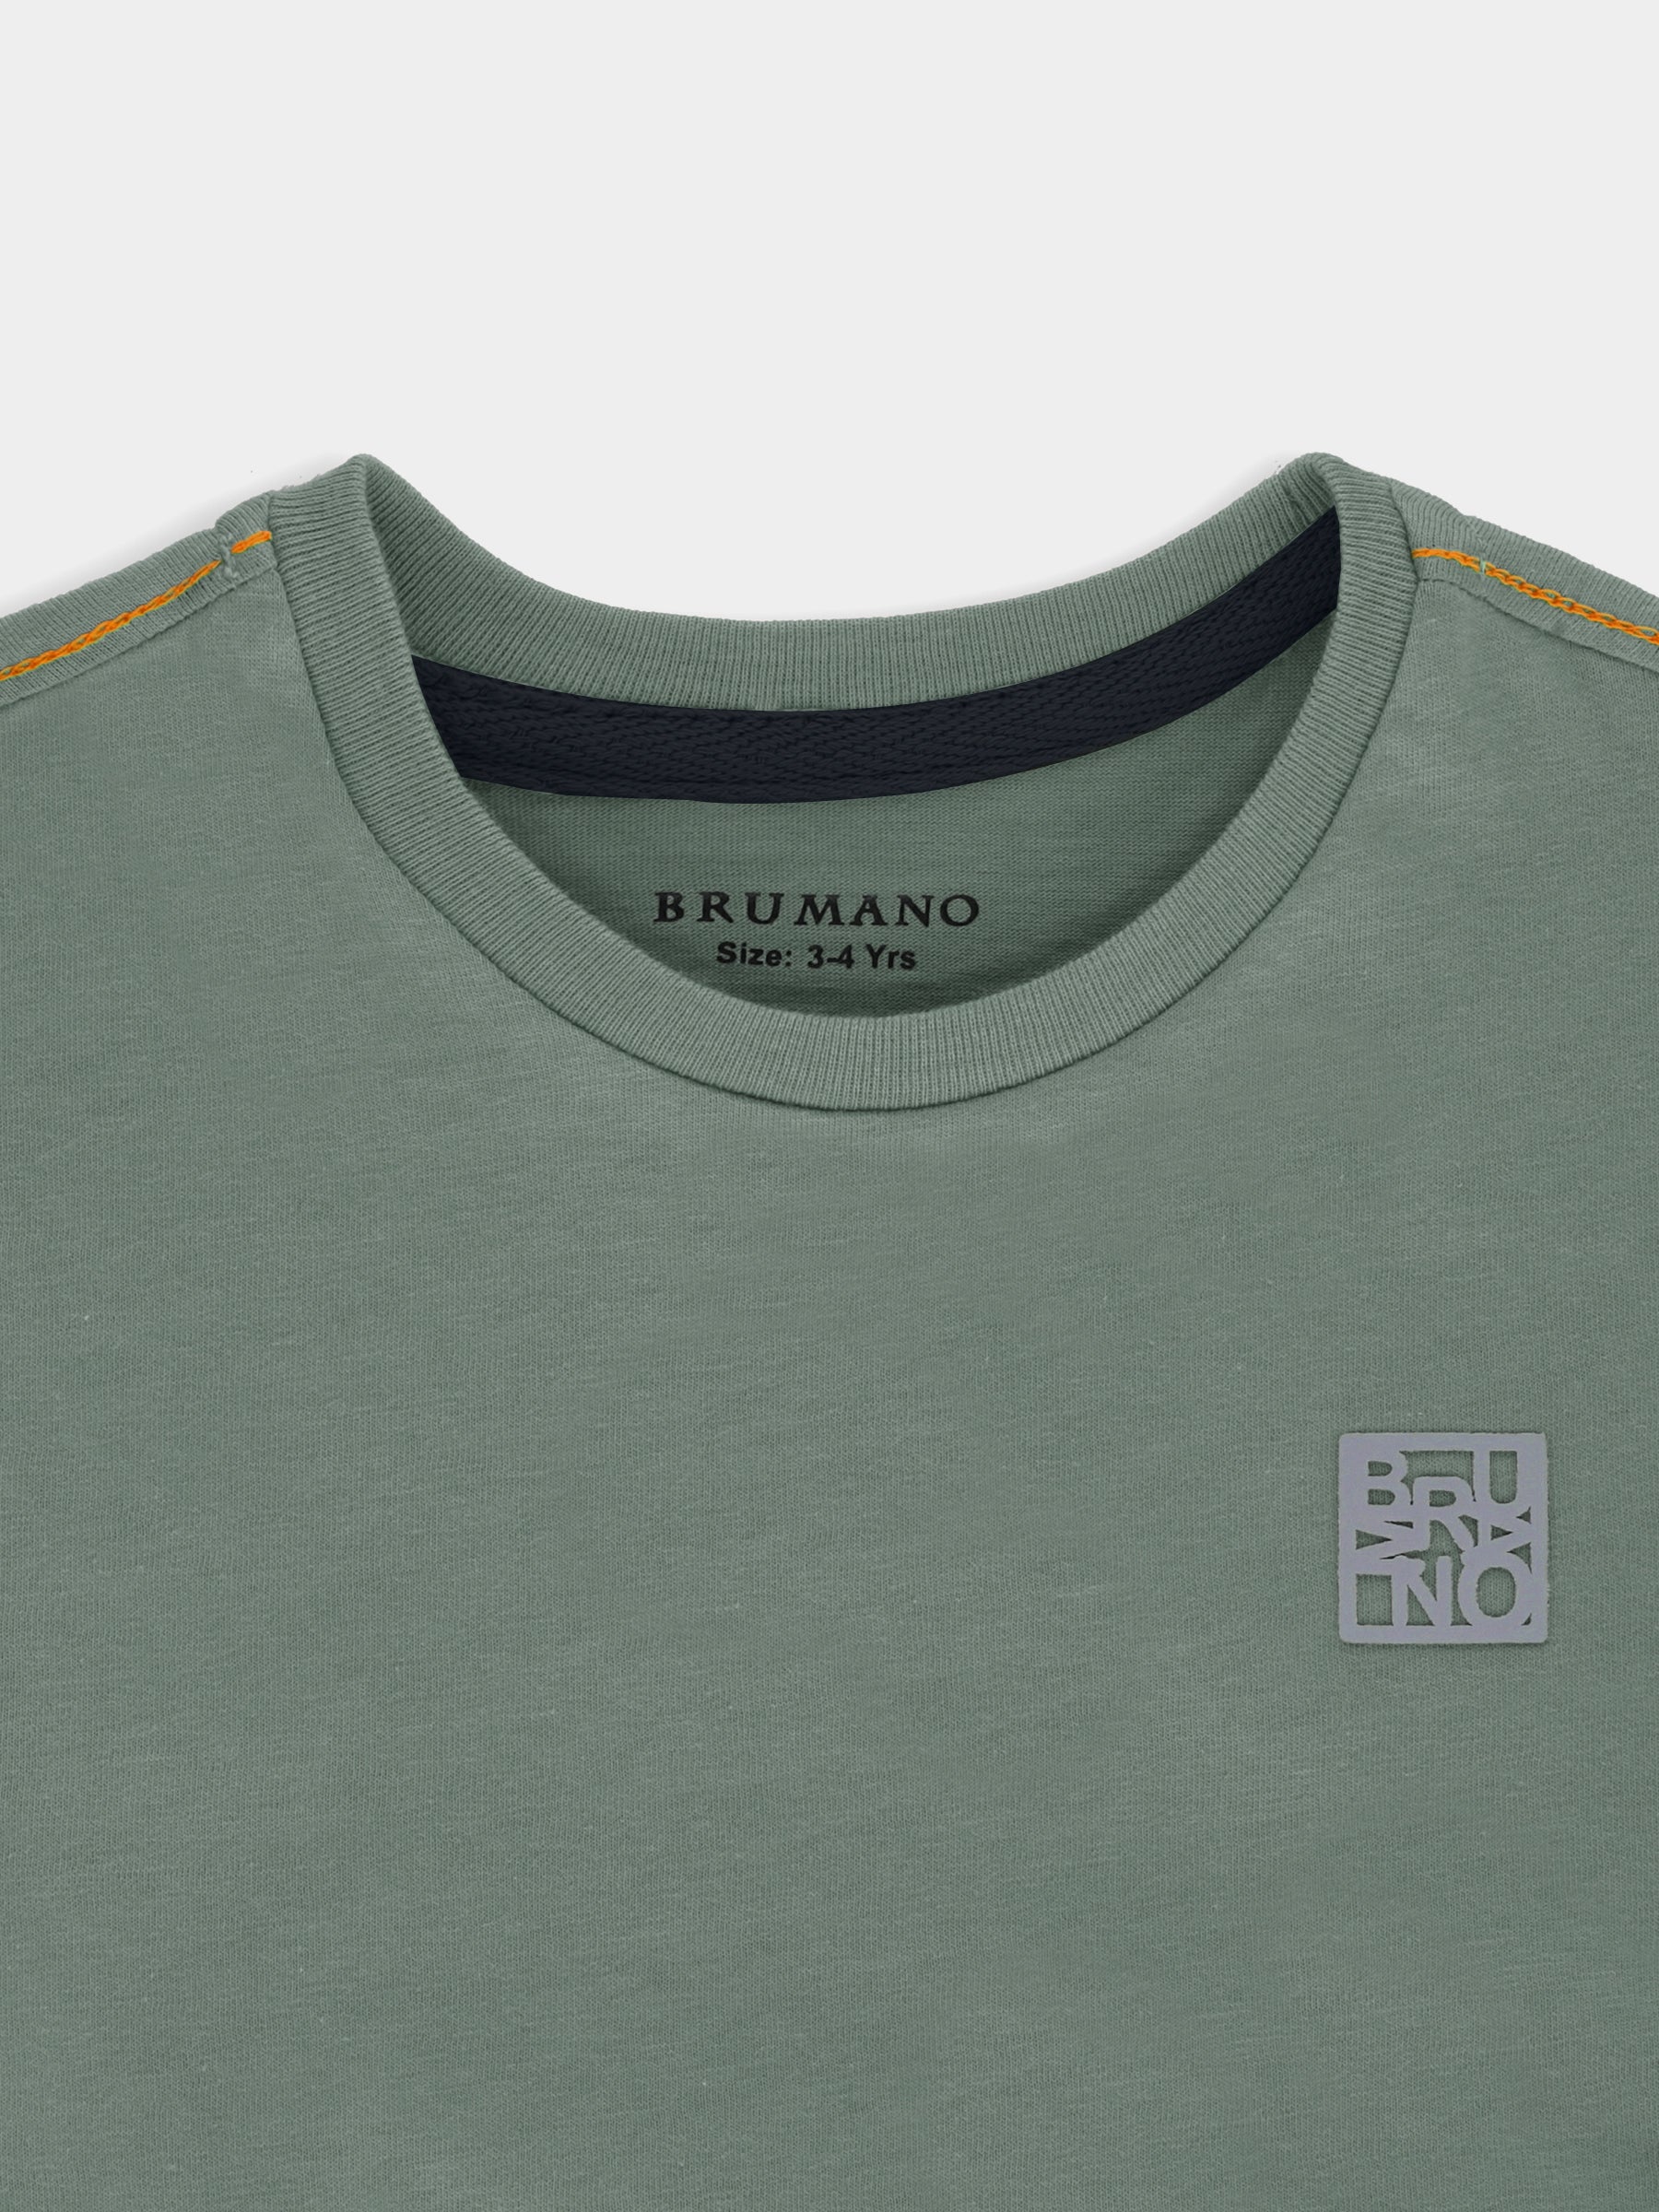 Olive Green Crew Neck Casual T-Shirt